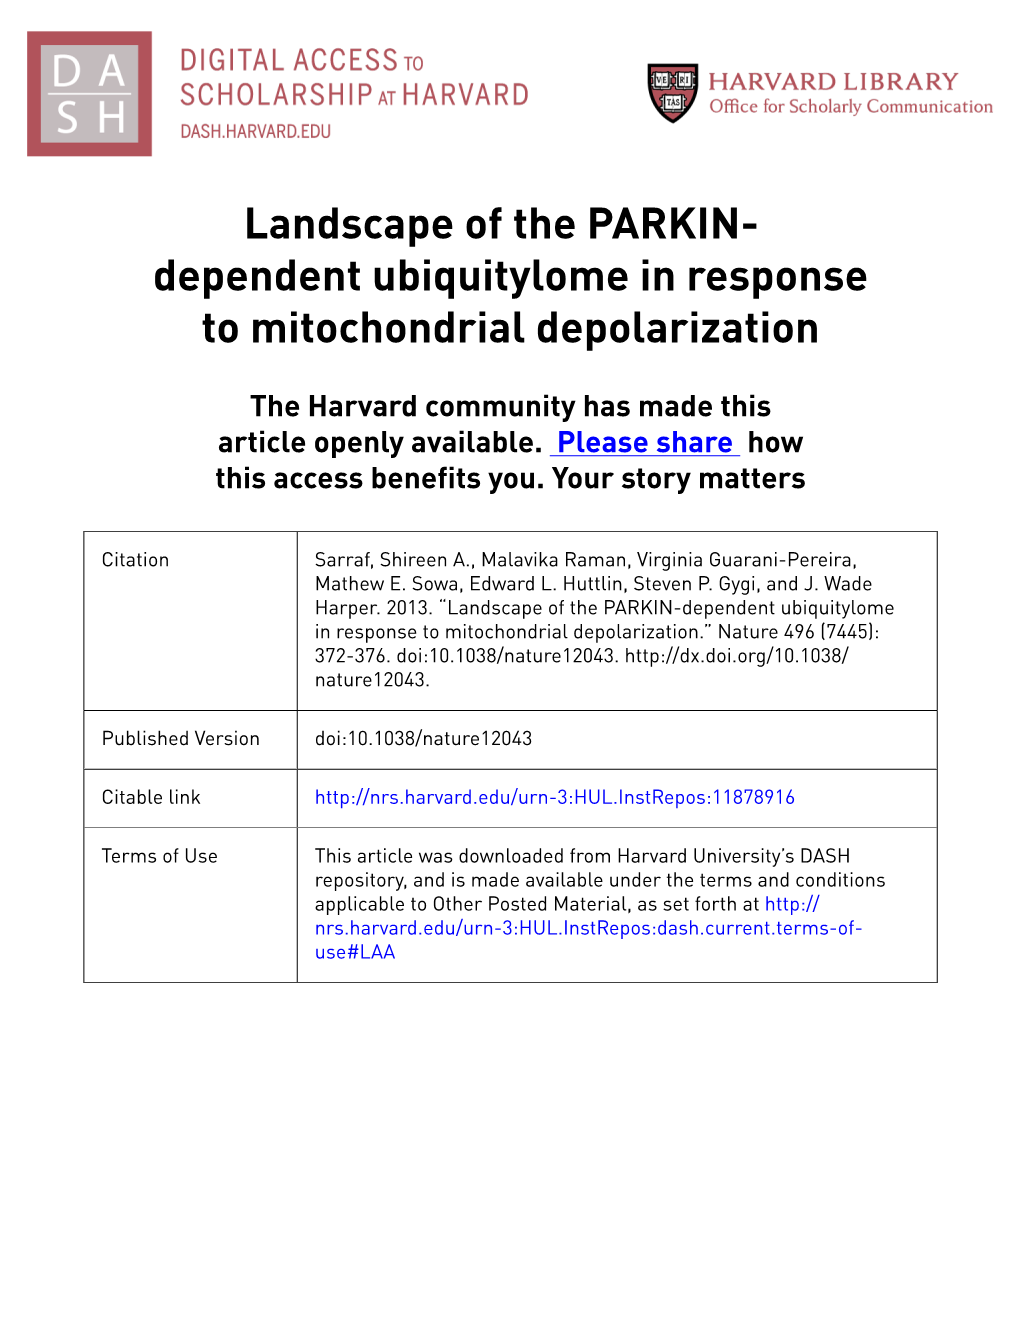 Landscape of the PARKIN- Dependent Ubiquitylome in Response to Mitochondrial Depolarization